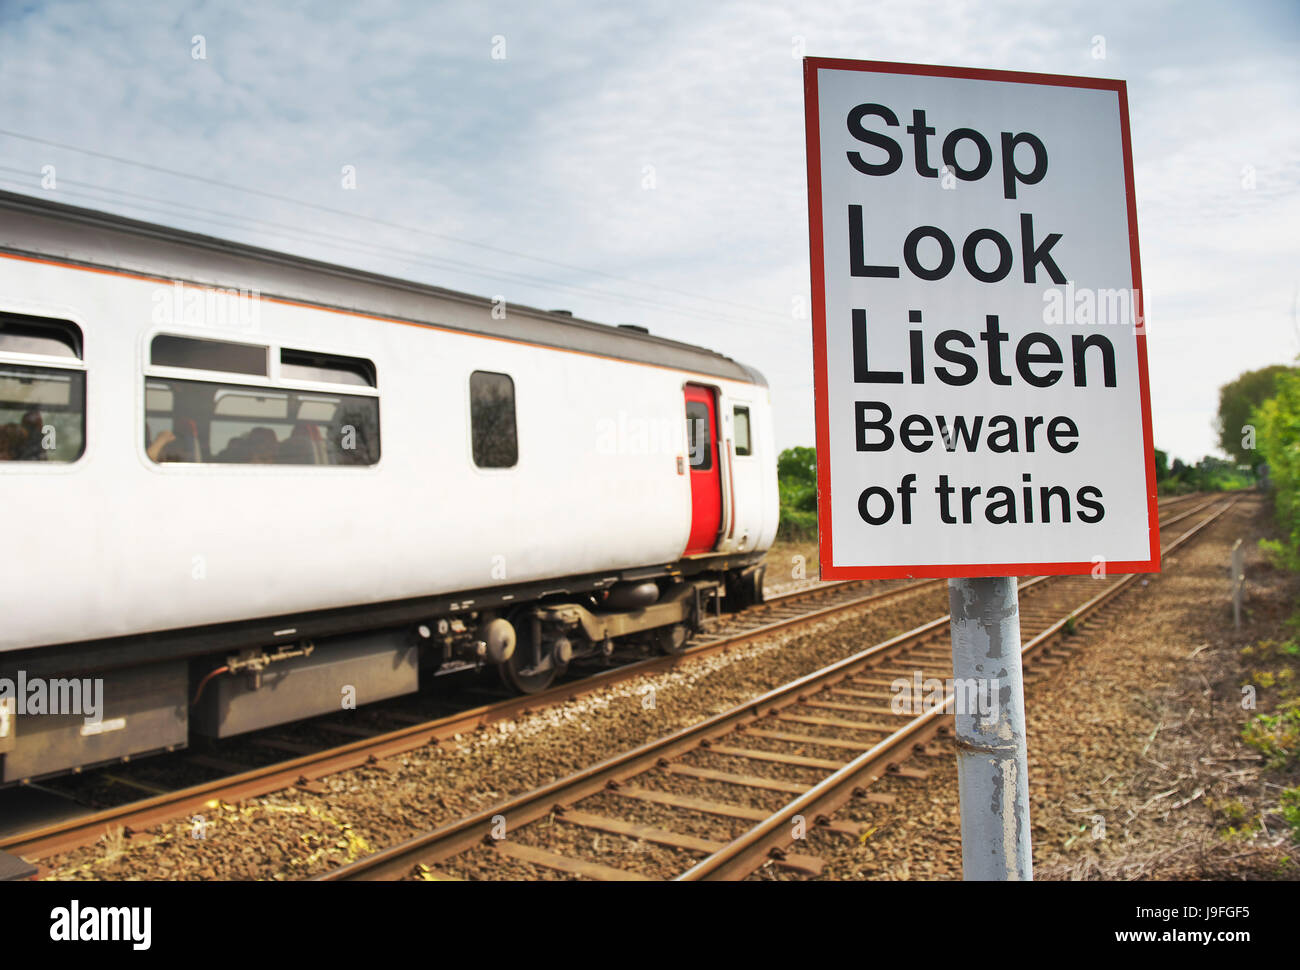 Stop Look Listen Beware of Trains sign on the edge of train tracks in rural norfolk as the diesel train passes Stock Photo